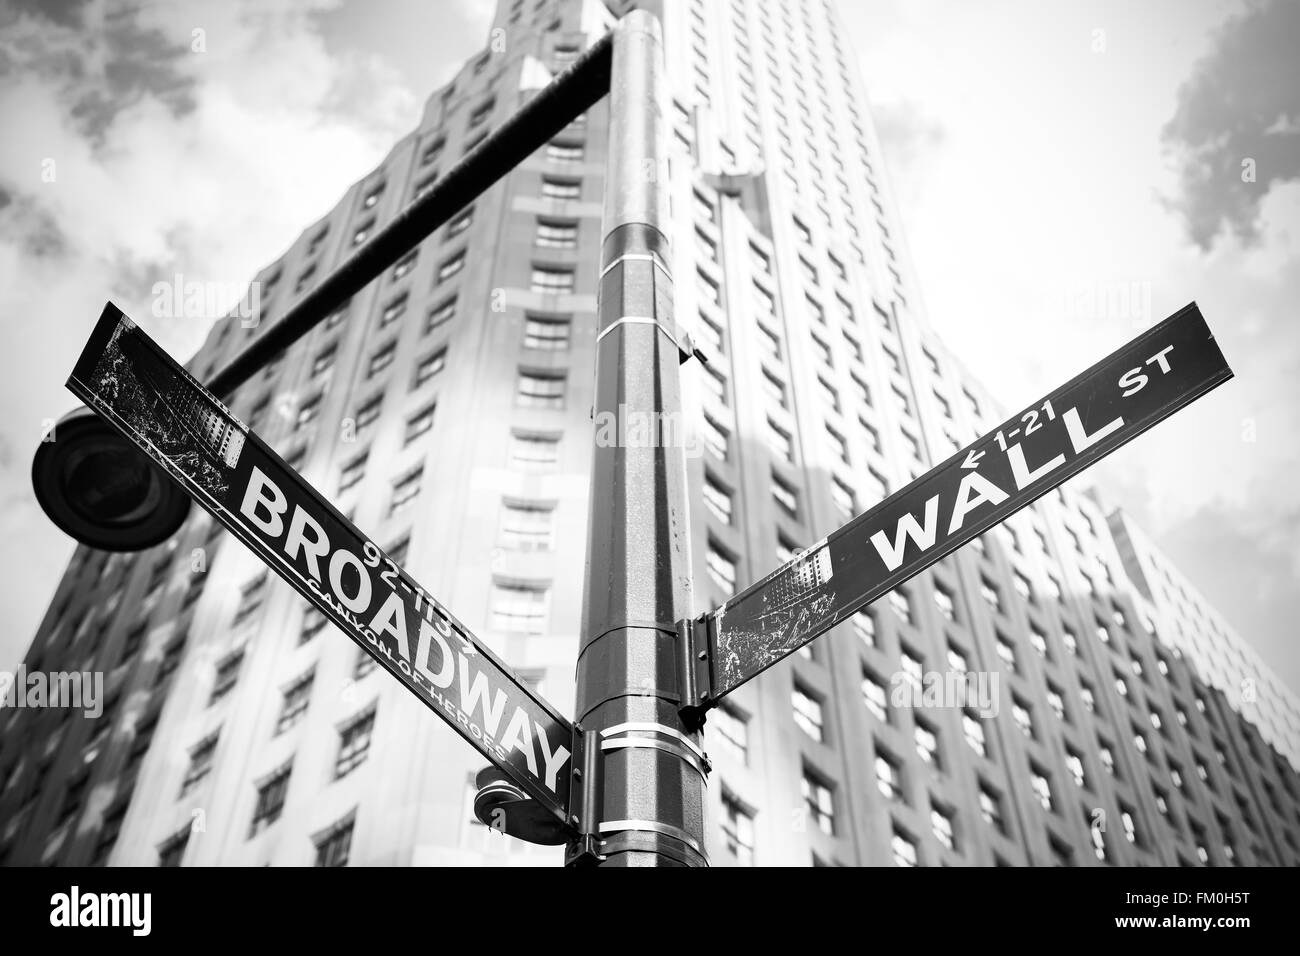 Wall Street and Broadway sign in Manhattan, New York, USA. Stock Photo